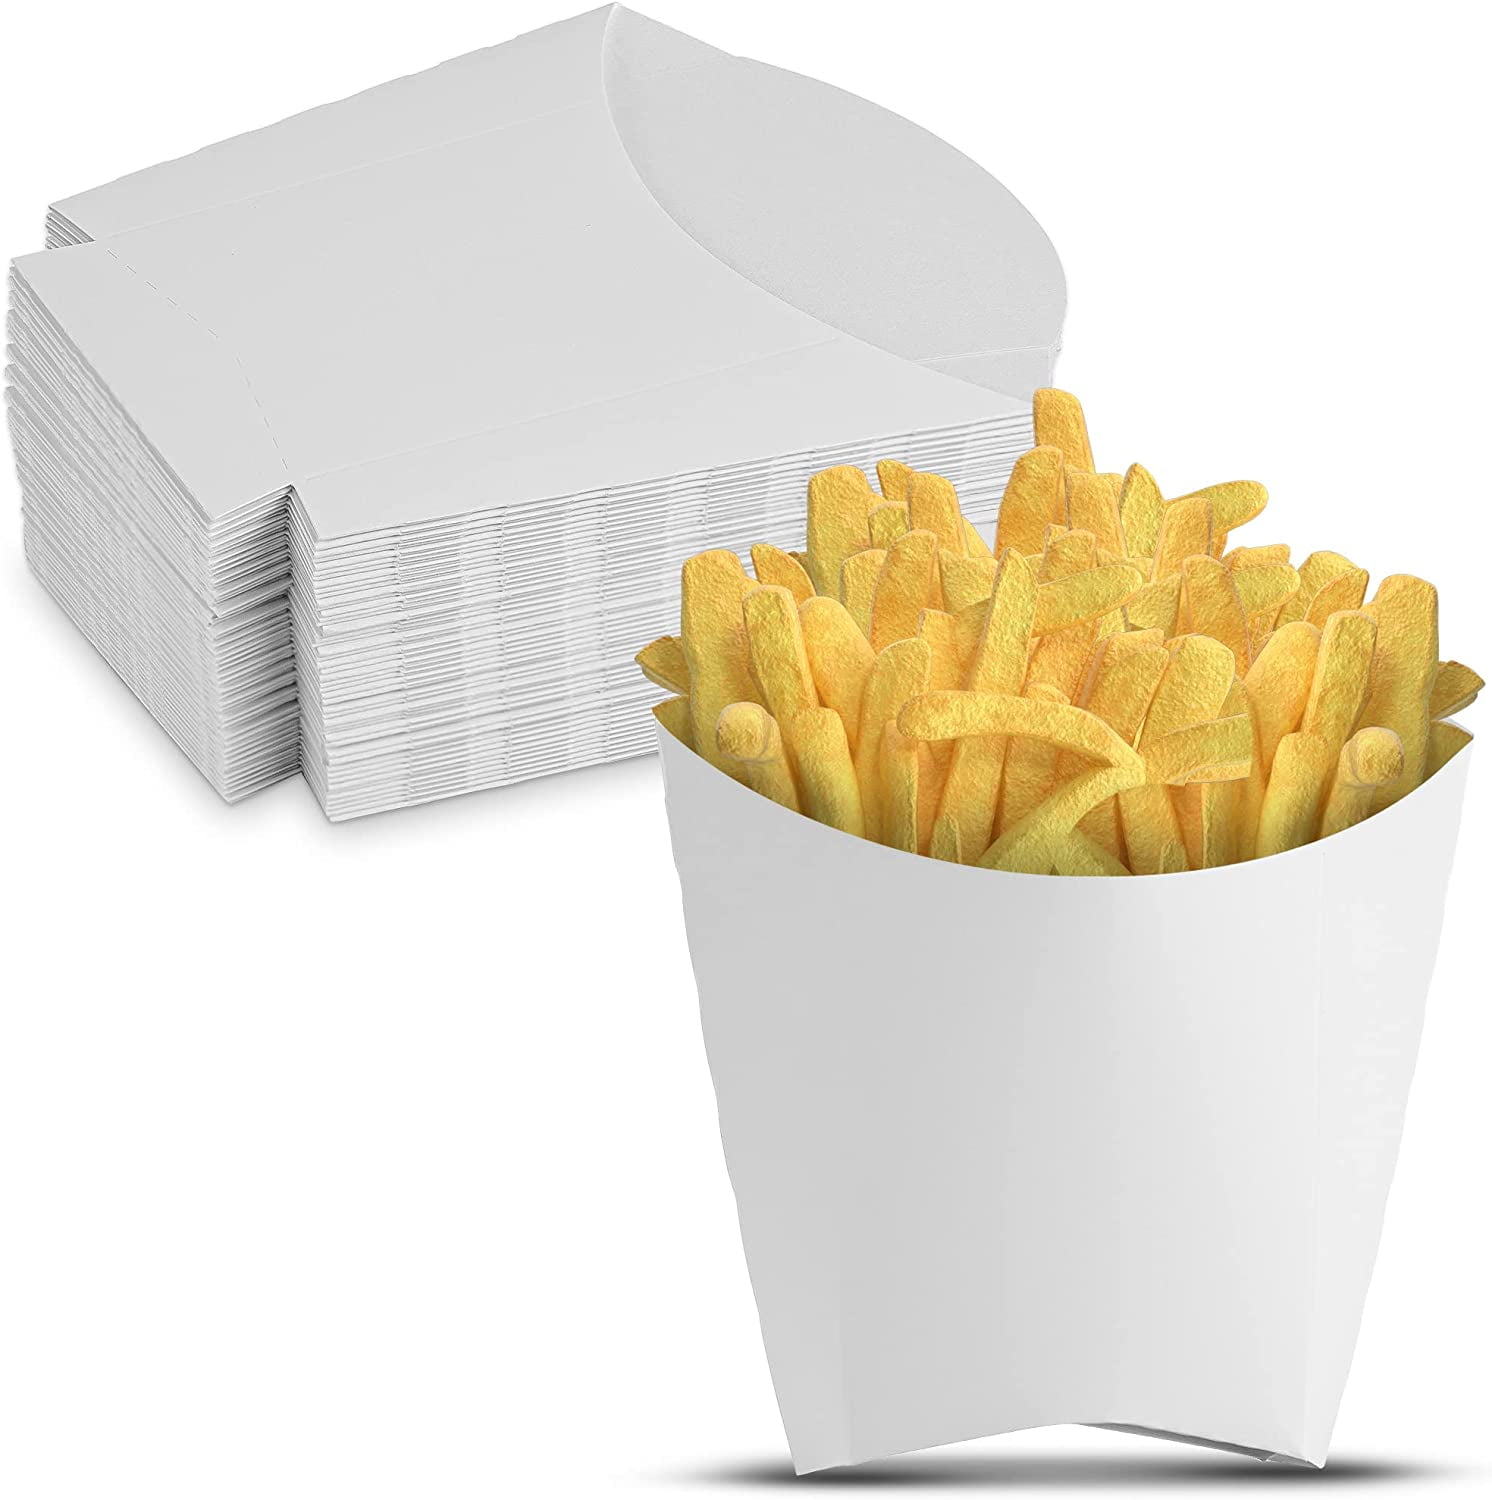 50ct MT Products 5 oz Paperboard Scoop French Fries Holder/French Fry Cups Pack of 50 Red